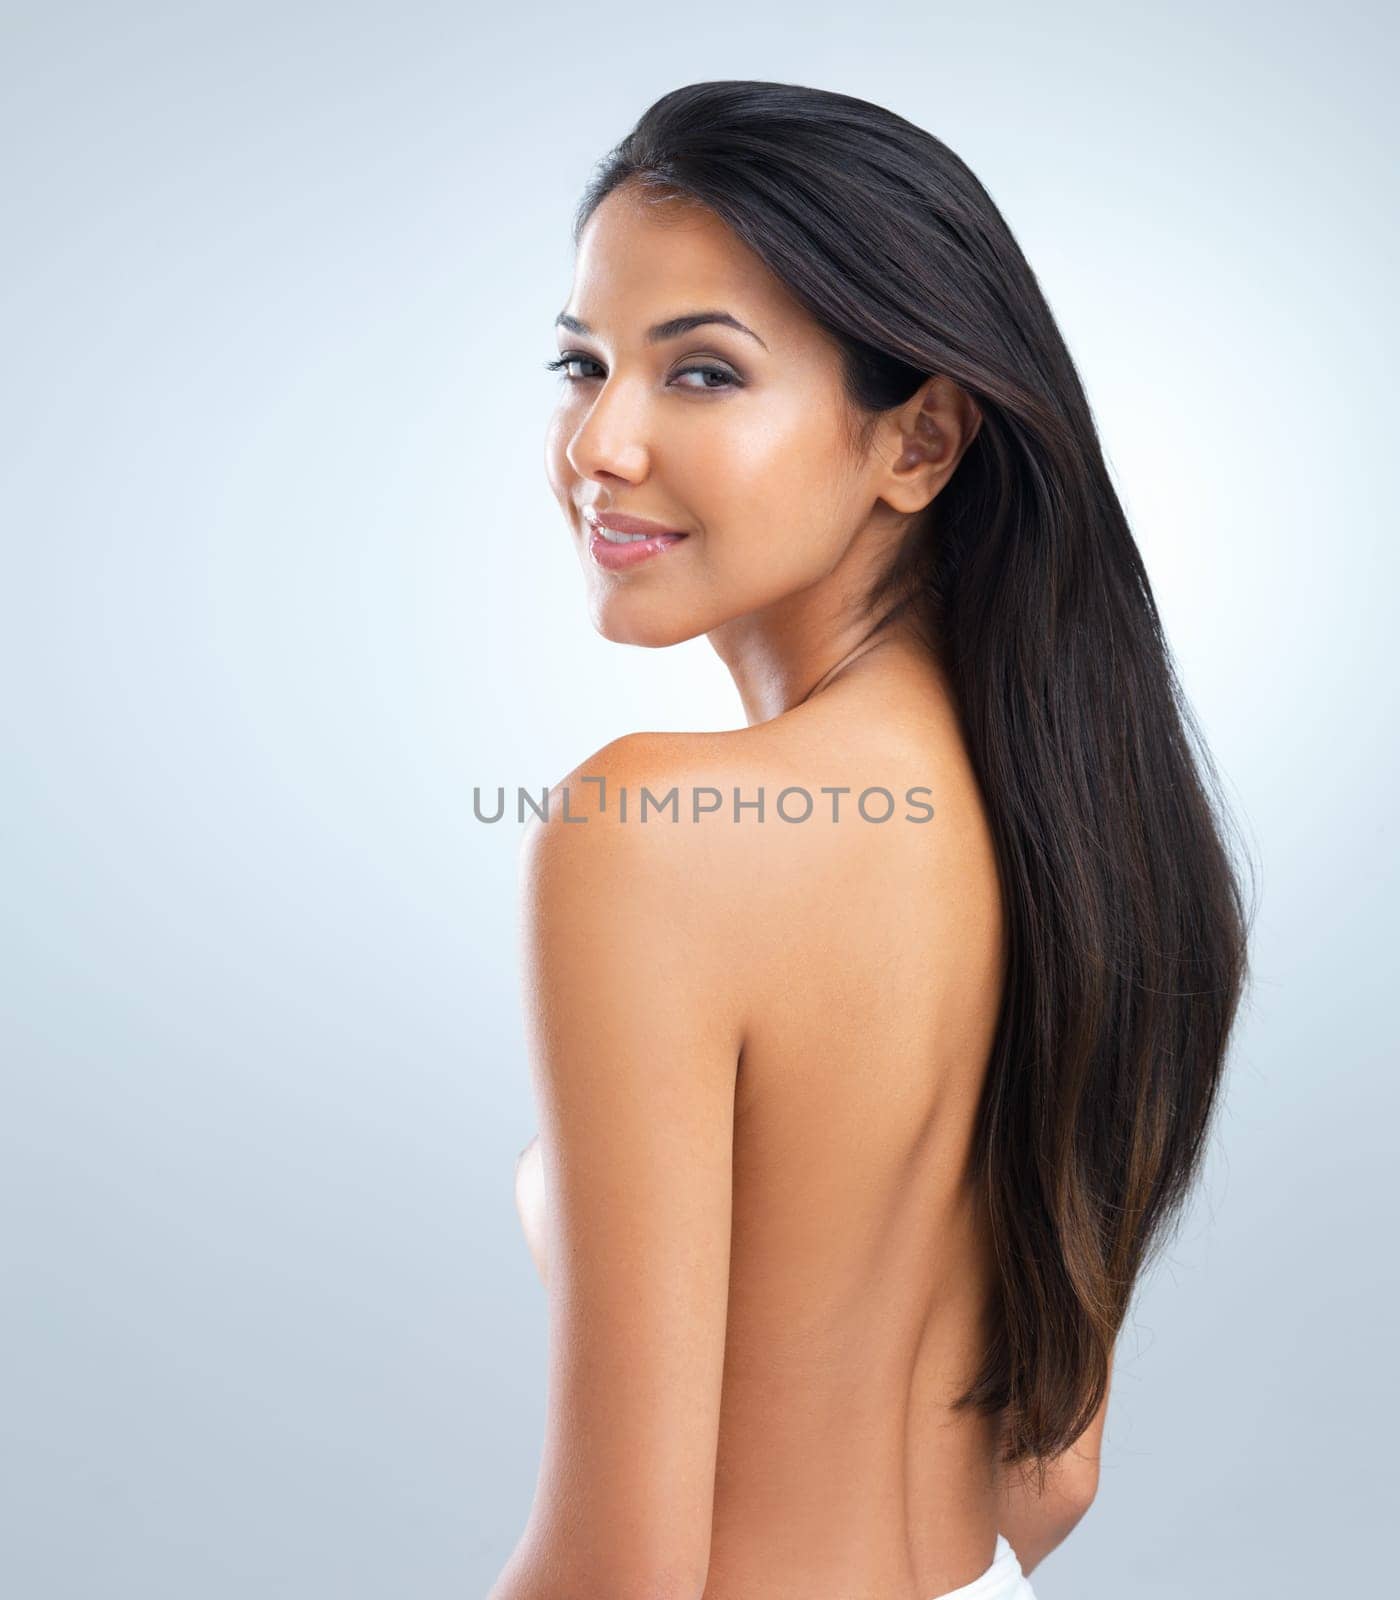 Woman, beauty and hair with shine, portrait of model in studio with cosmetics and keratin treatment on grey background. Haircare, cosmetology and touching skin for wellness with texture and growth.